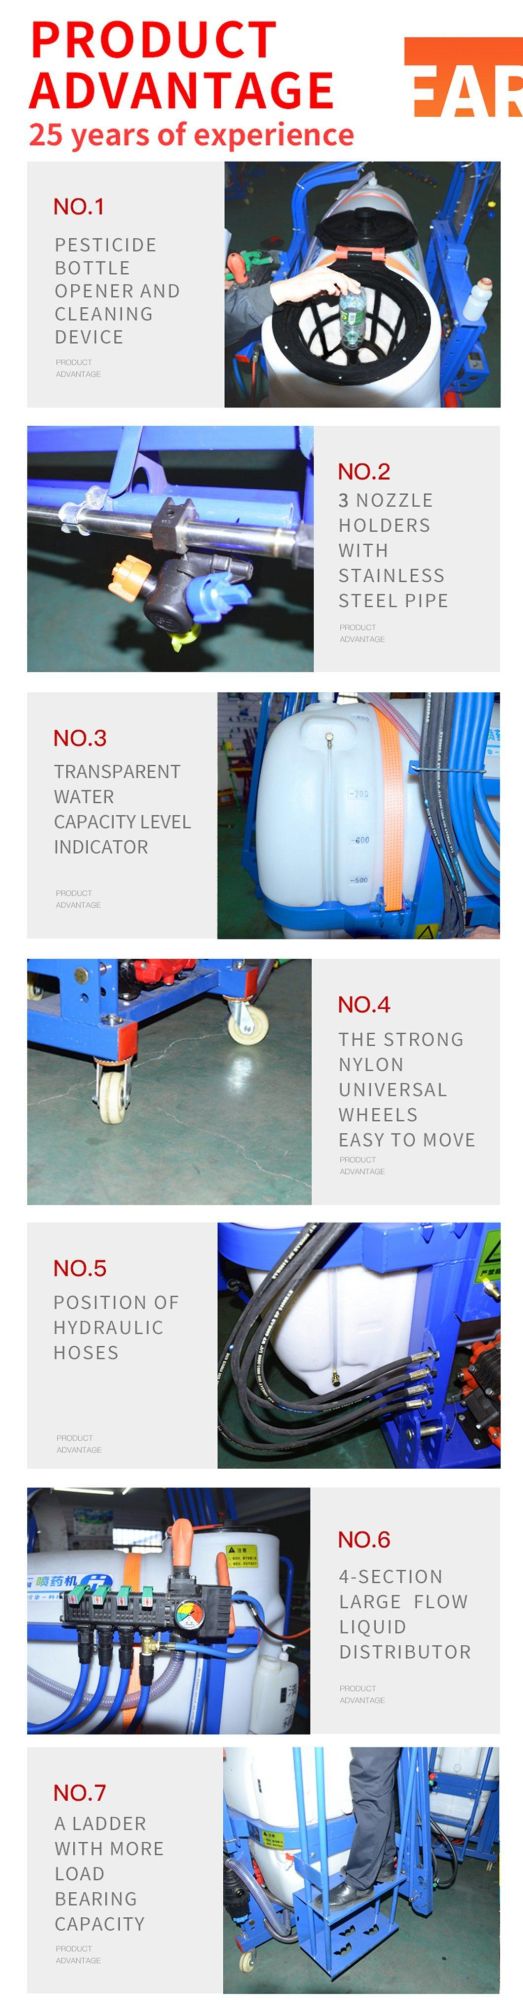 High Performance Farm Corn Machine Agriculture Drone Implement Agricultural Machinery Boom Sprayer